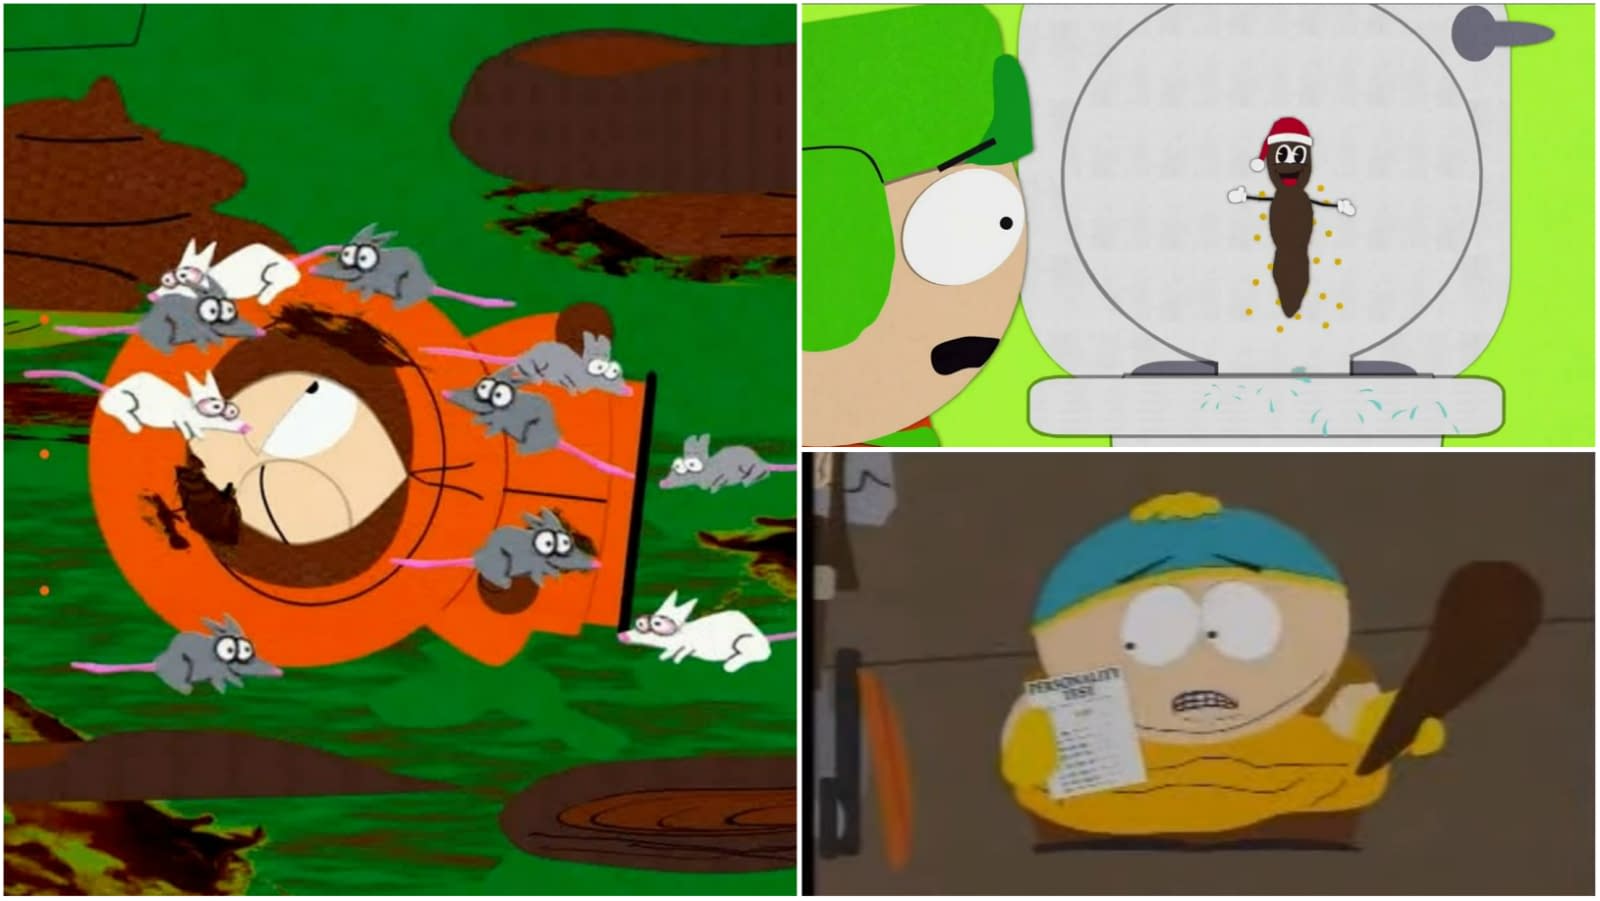 South Park: Joining the Panderverse is now streaming on Paramount+